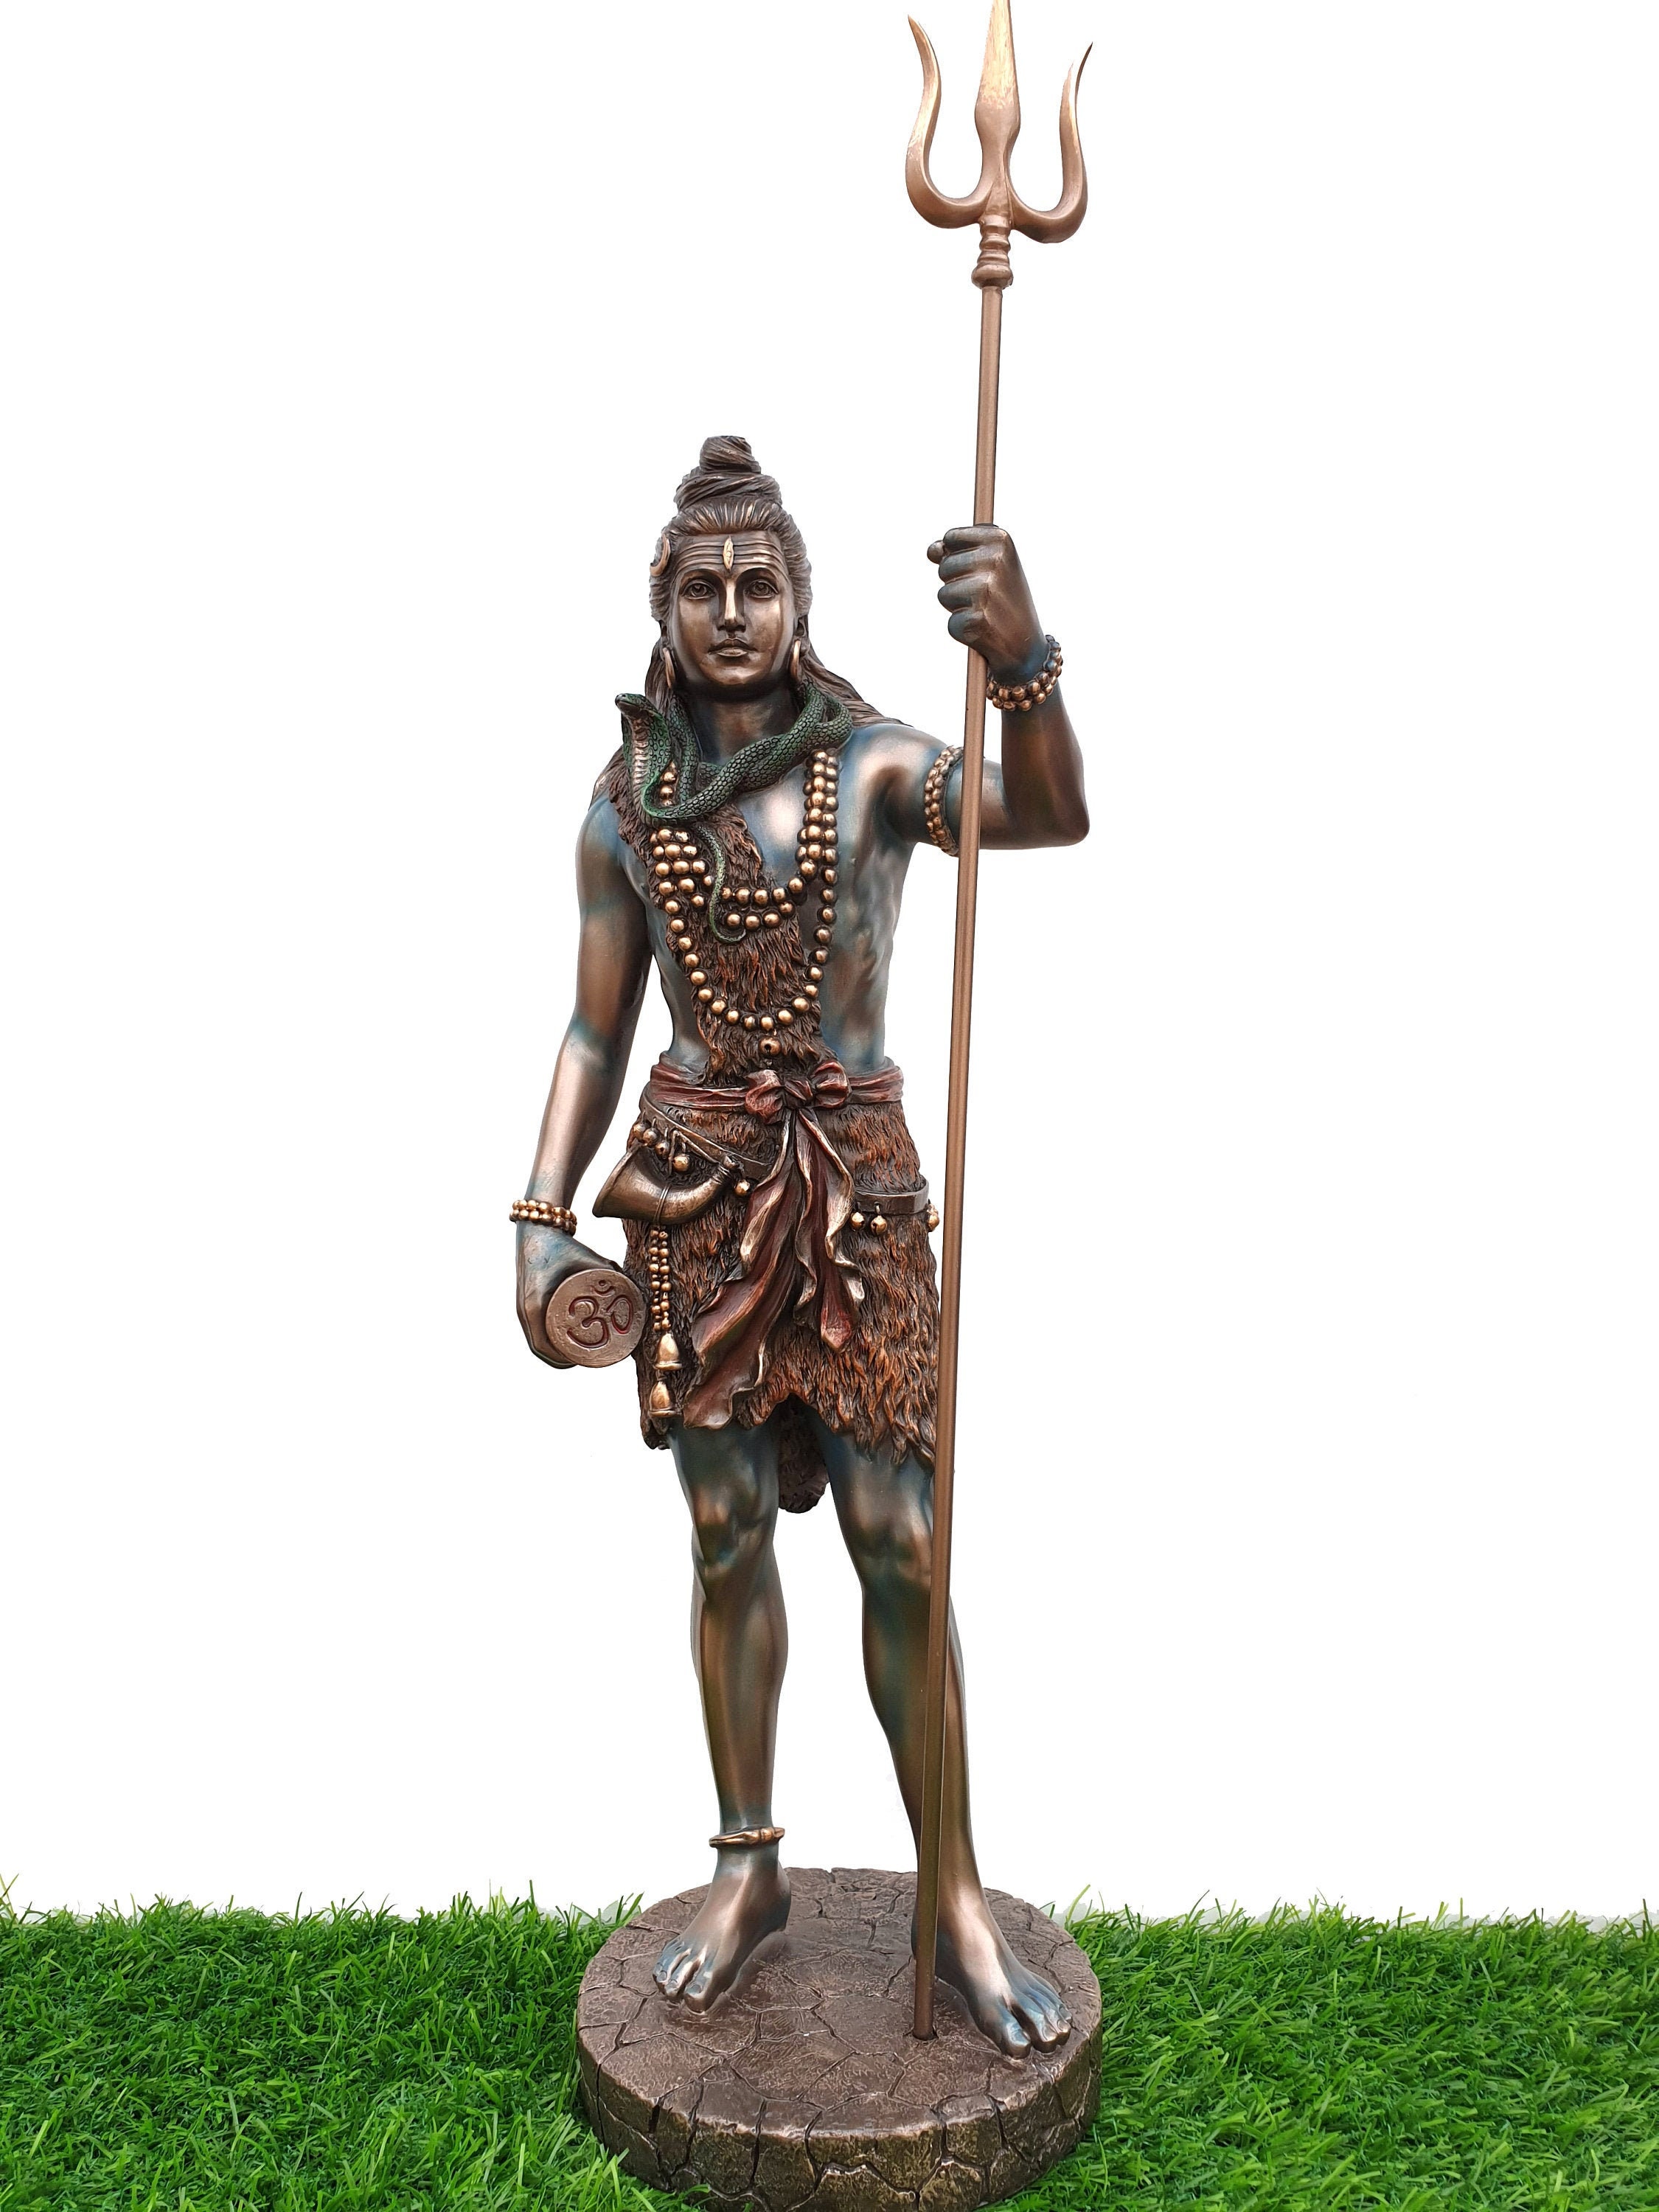 AI Art Generator: A majestic depiction of Lord Shiva, standing tall with  his trident in hand. He exudes power and tranquility, while the trident  symbolizes his divine authority. The scene is illuminated